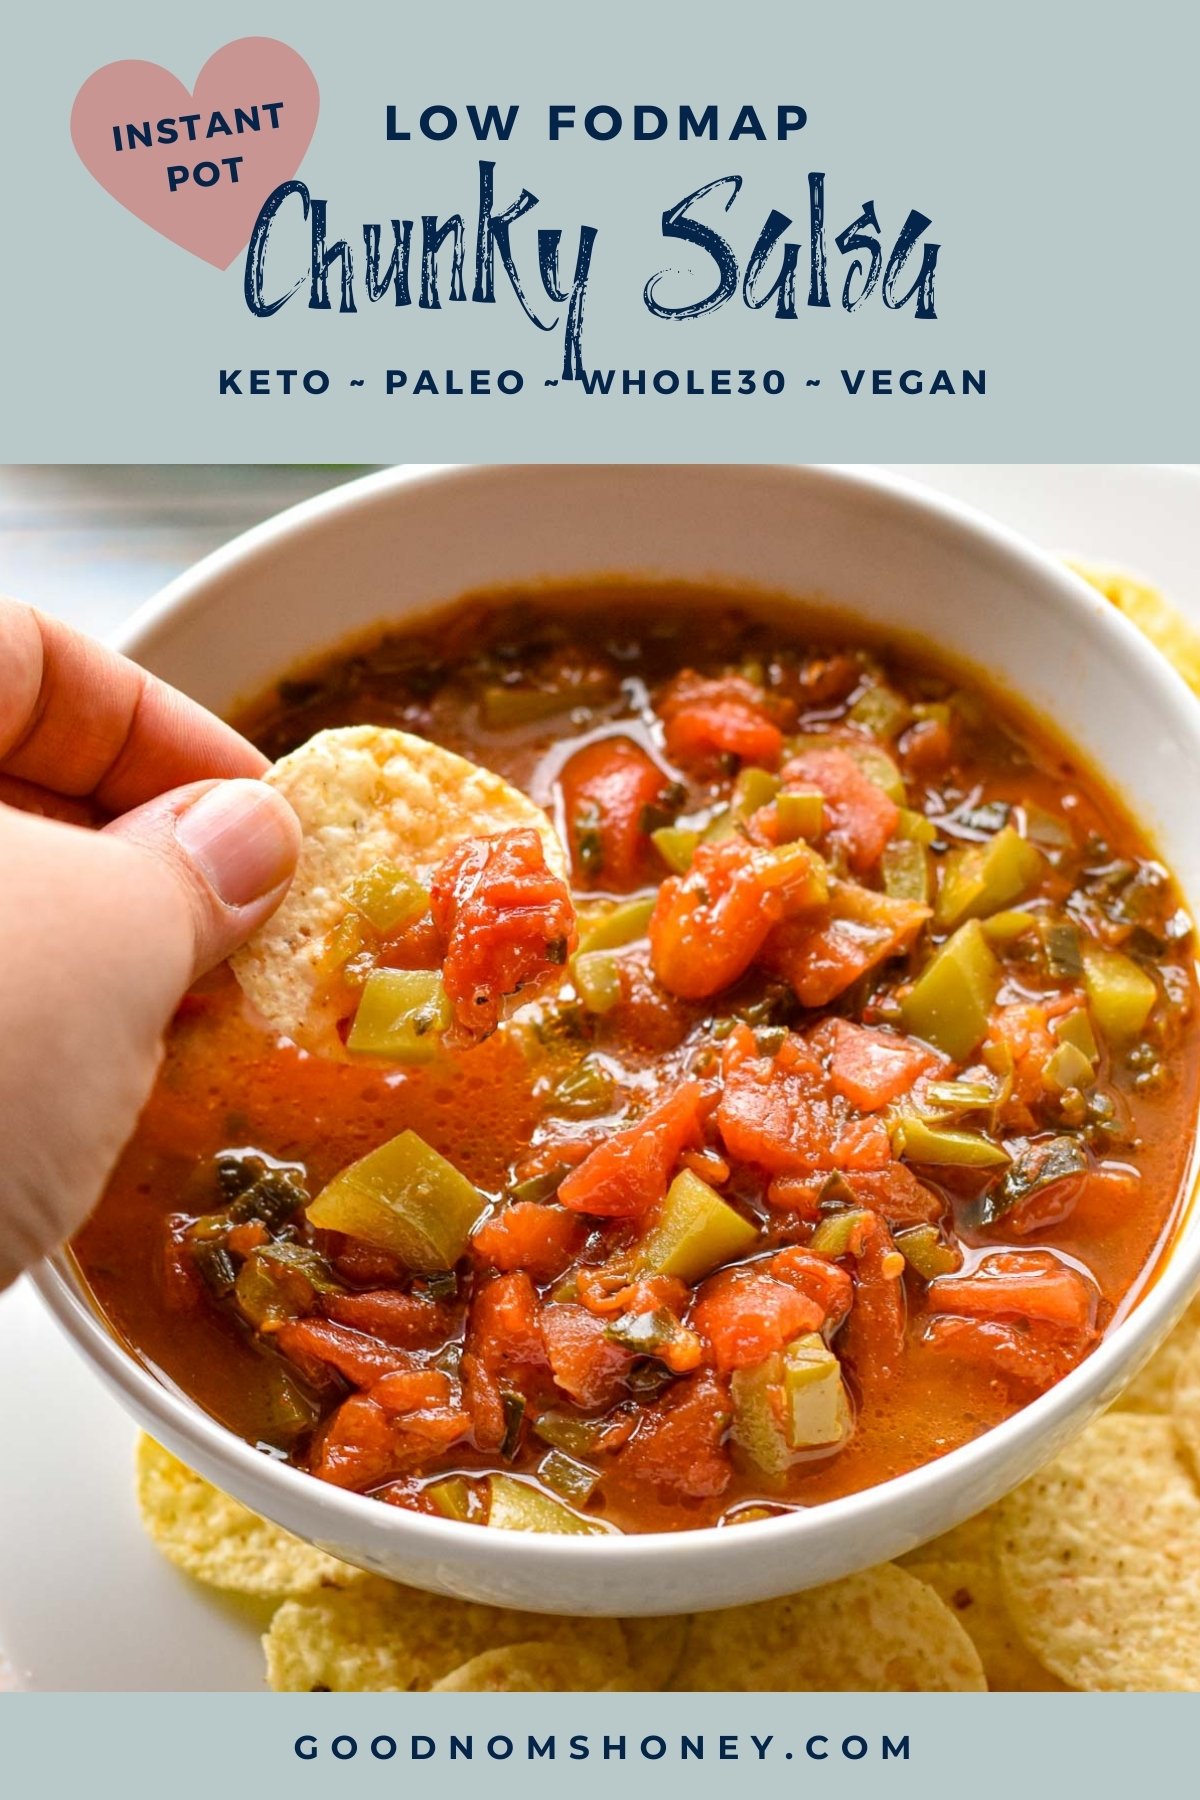 Pinterest image with low fodmap instant pot chunky salsa keto paleo whole30 vegan at the top and goodnomshoney.com at the bottom